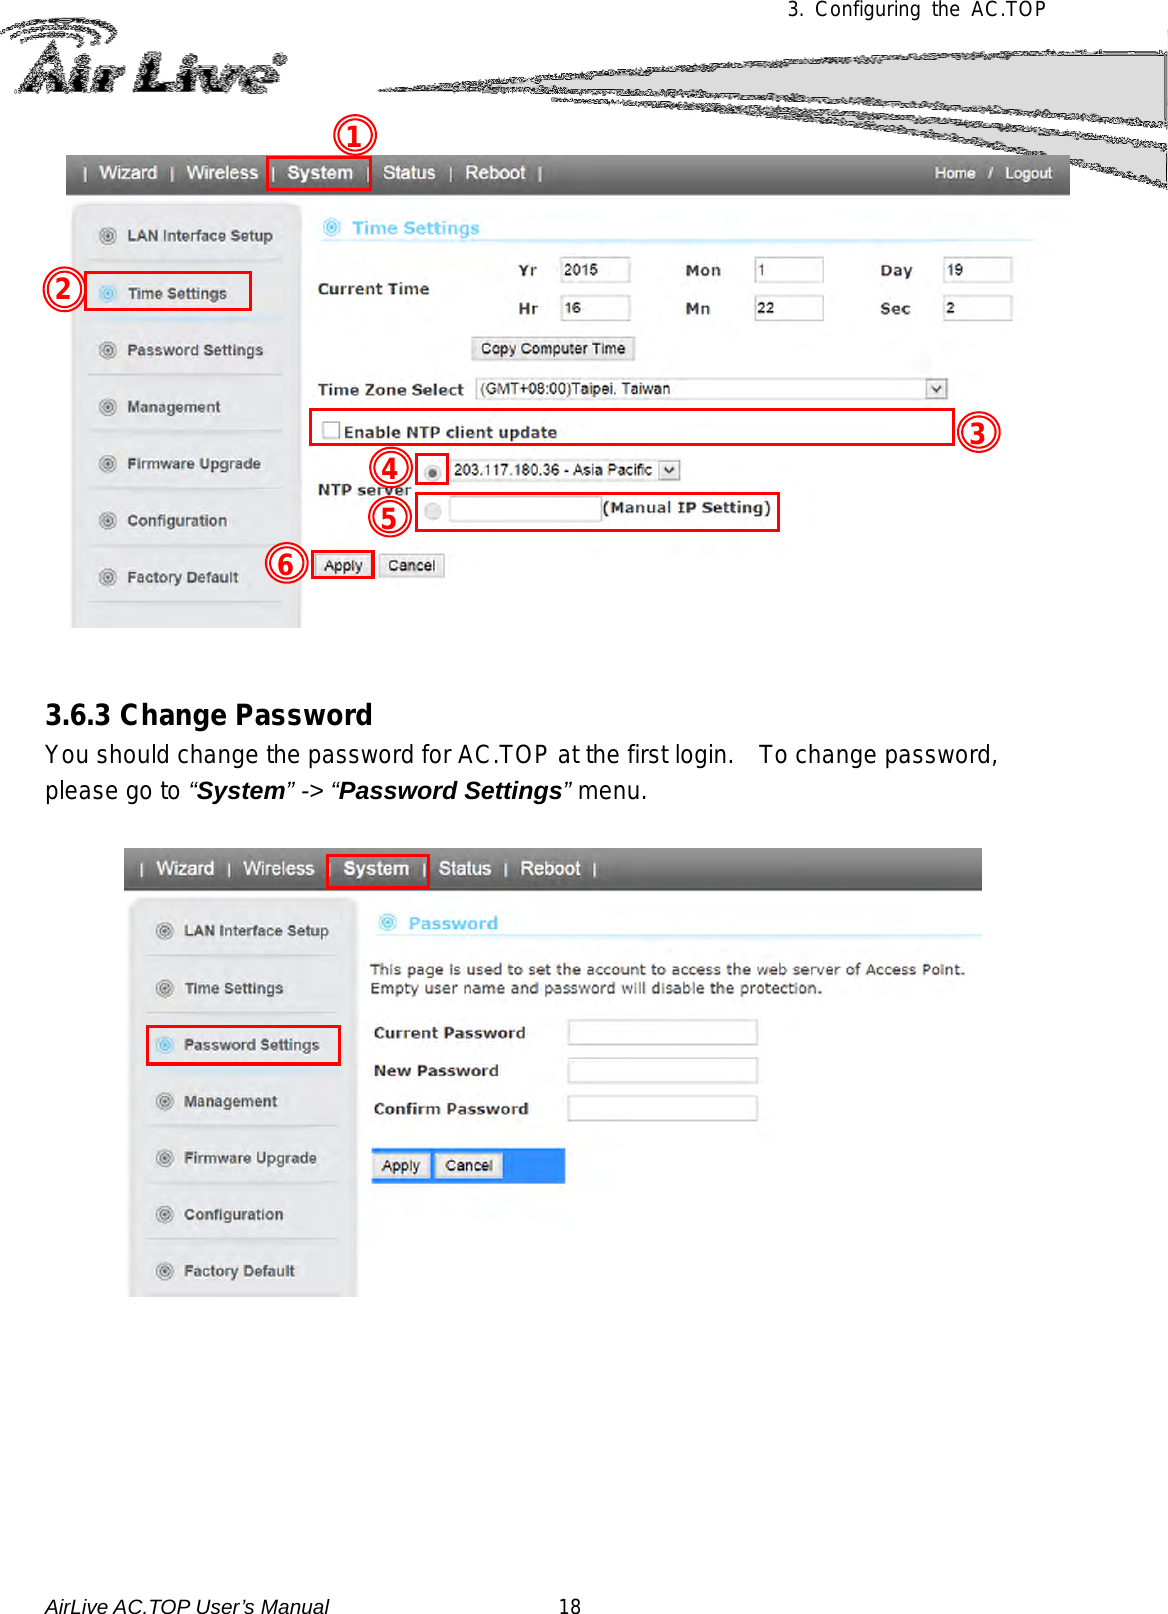 3.  Configuring the AC.TOP       3.6.3 Change Password You should change the password for AC.TOP at the first login.   To change password, please go to “System” -&gt; “Password Settings” menu.   5 4 3 2 1 6 AirLive AC.TOP User’s Manual                      18 